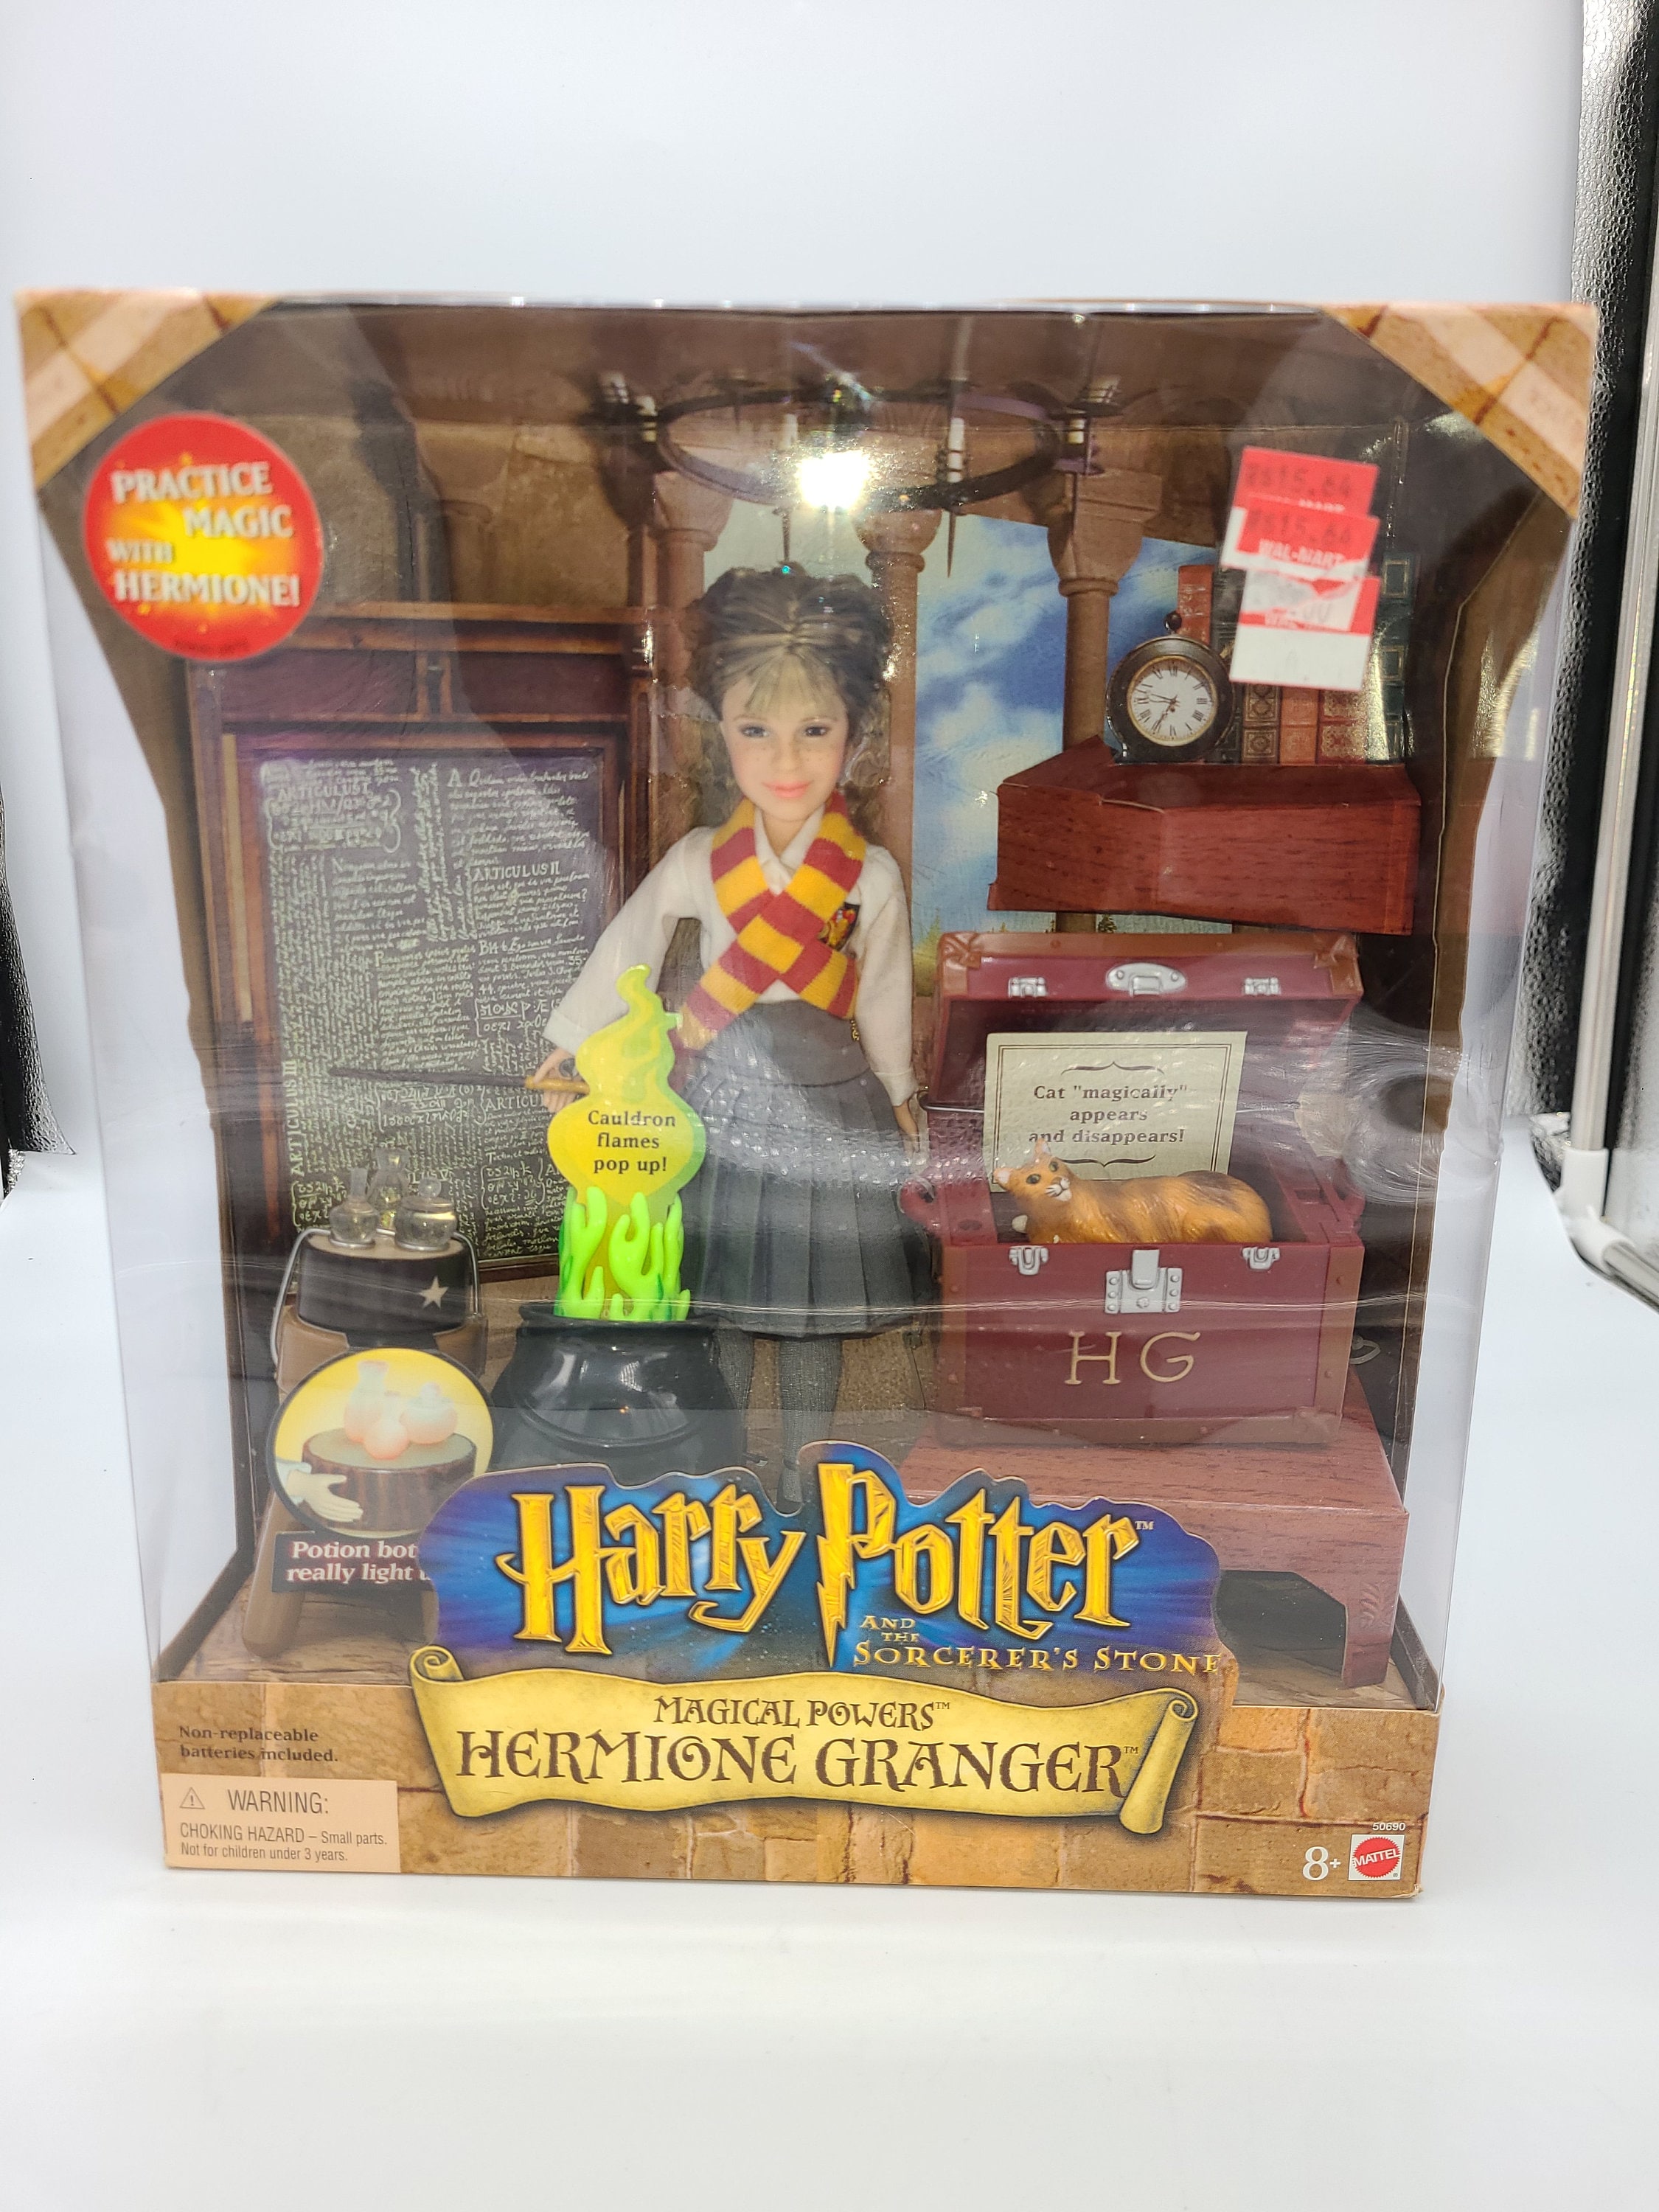 Harry Potter Magical Minis Play Set for Kids - Bundle with Harry Potter Figure and Accessories Plus Harry Potter Decal and Magic Kit | Harry Potter